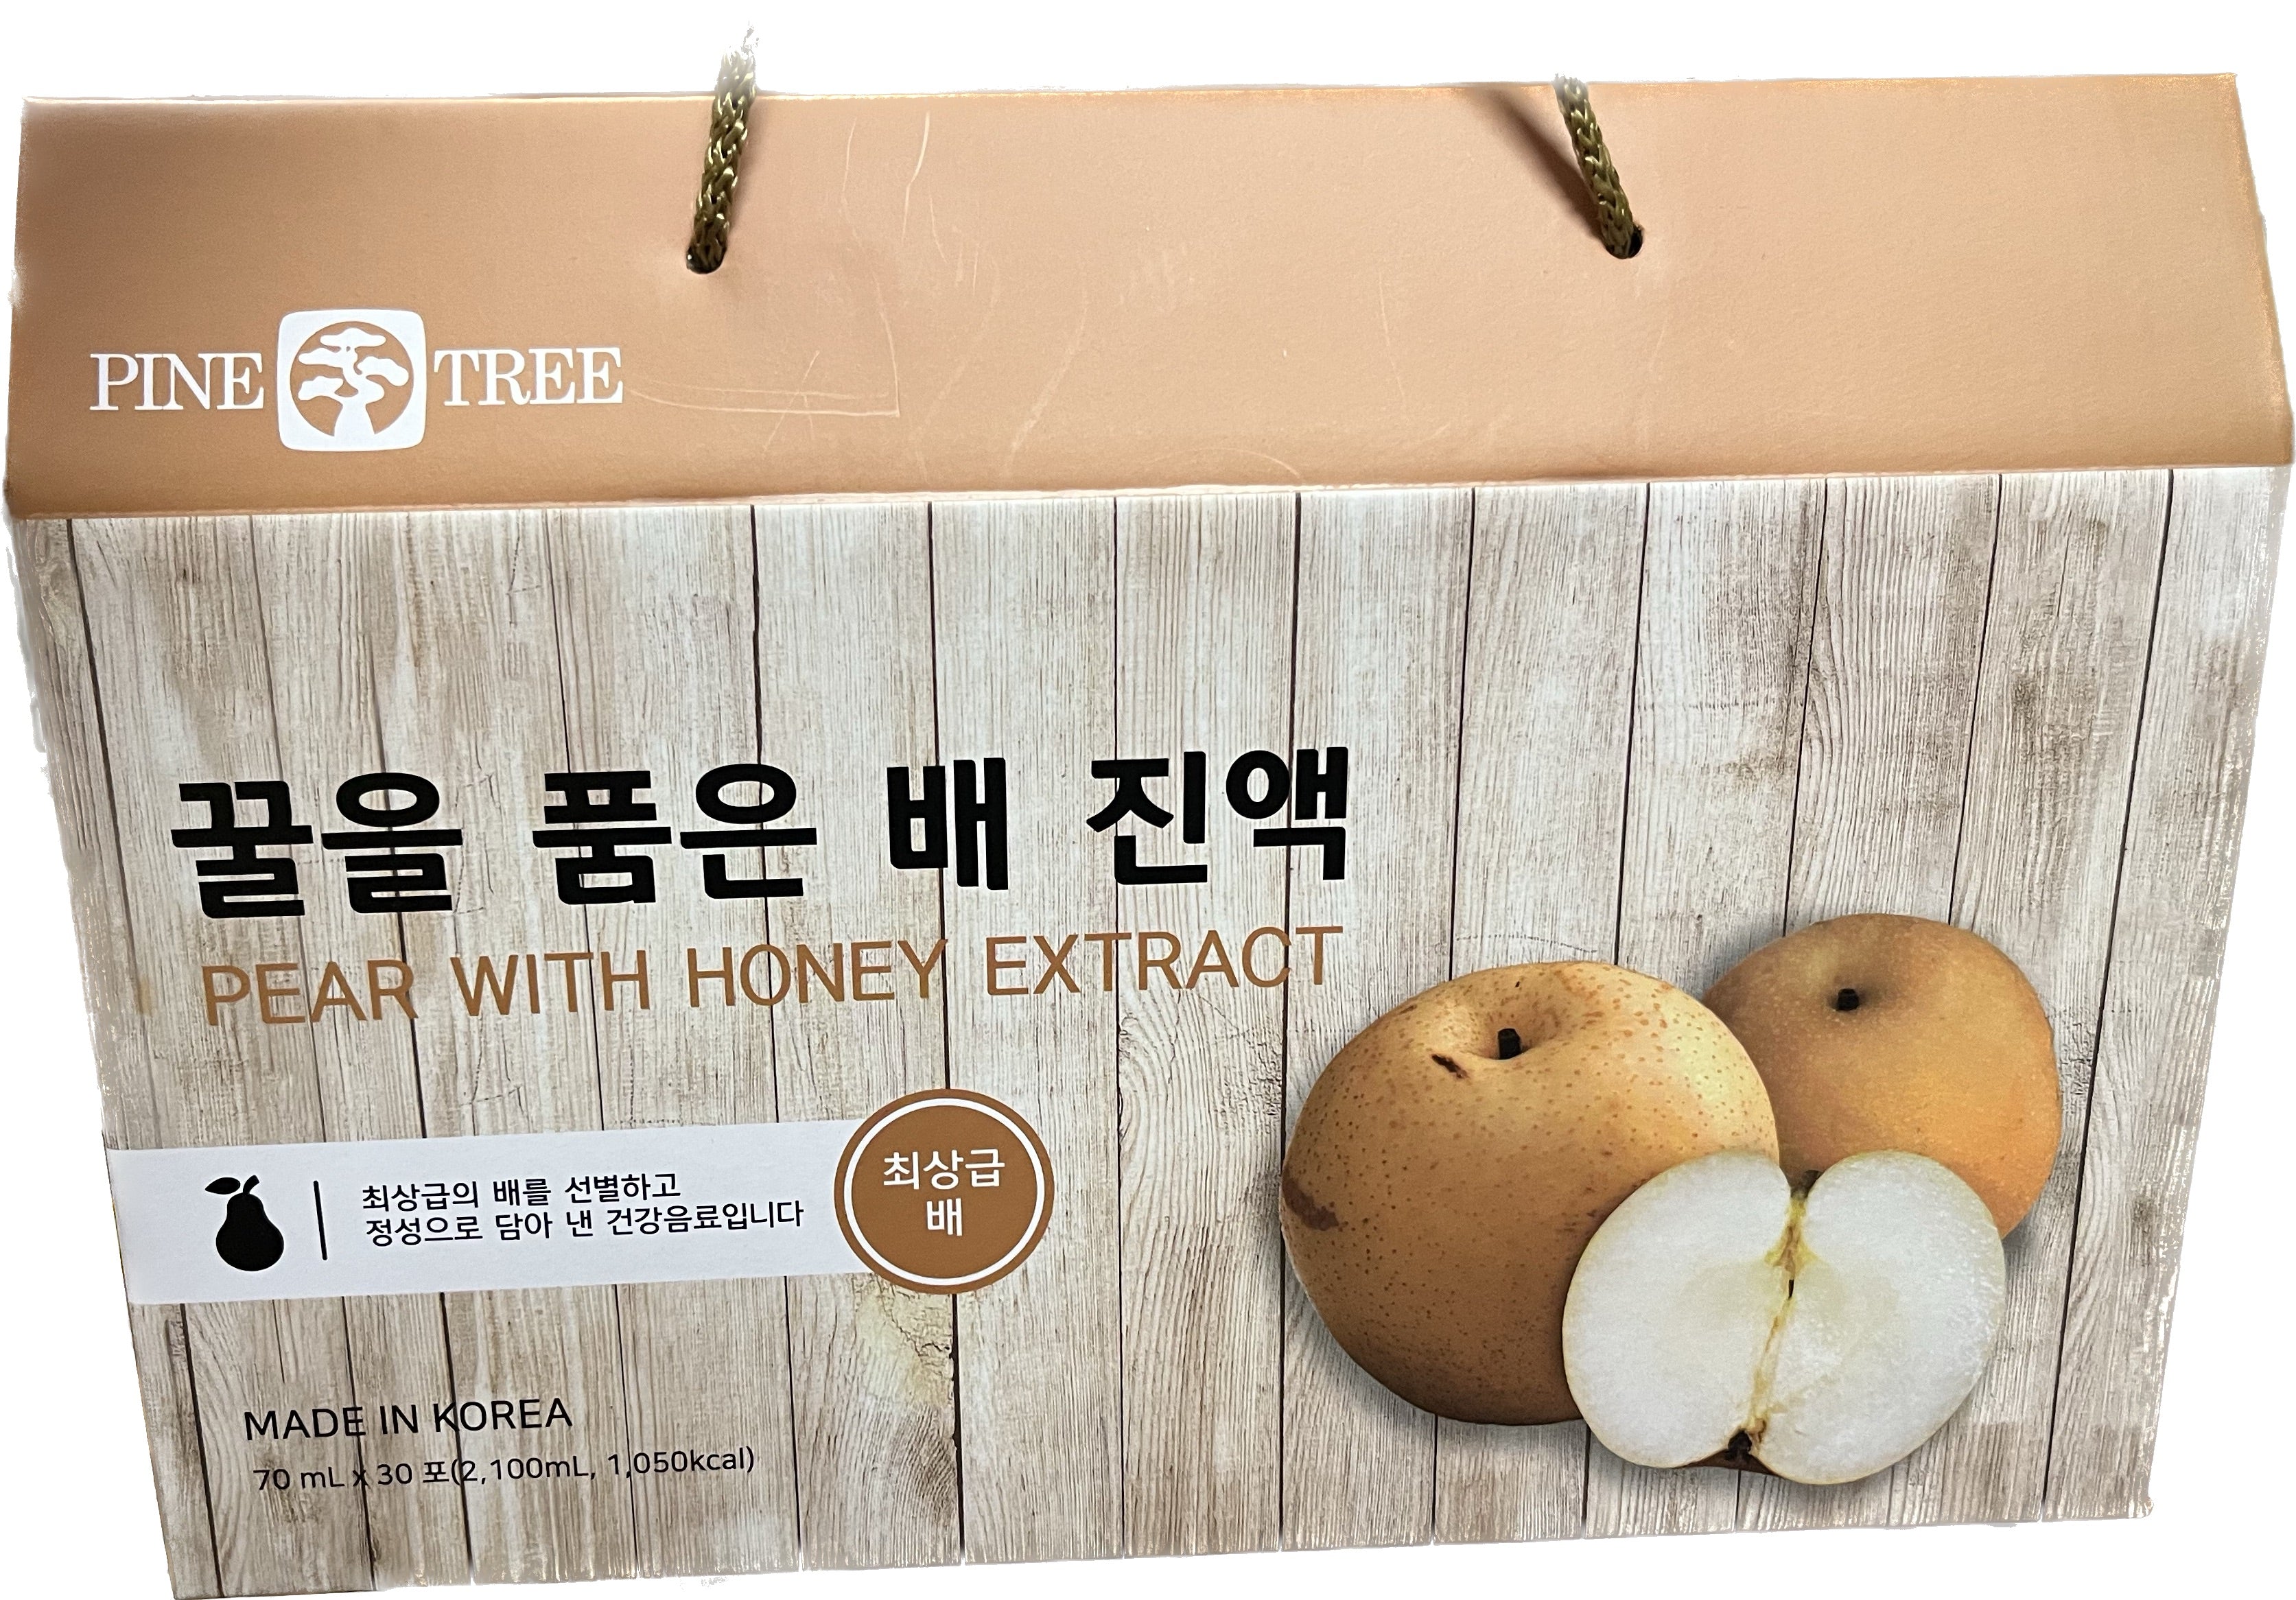 Pine Tree Brand- Pear With Honey Extract 70mL x 30